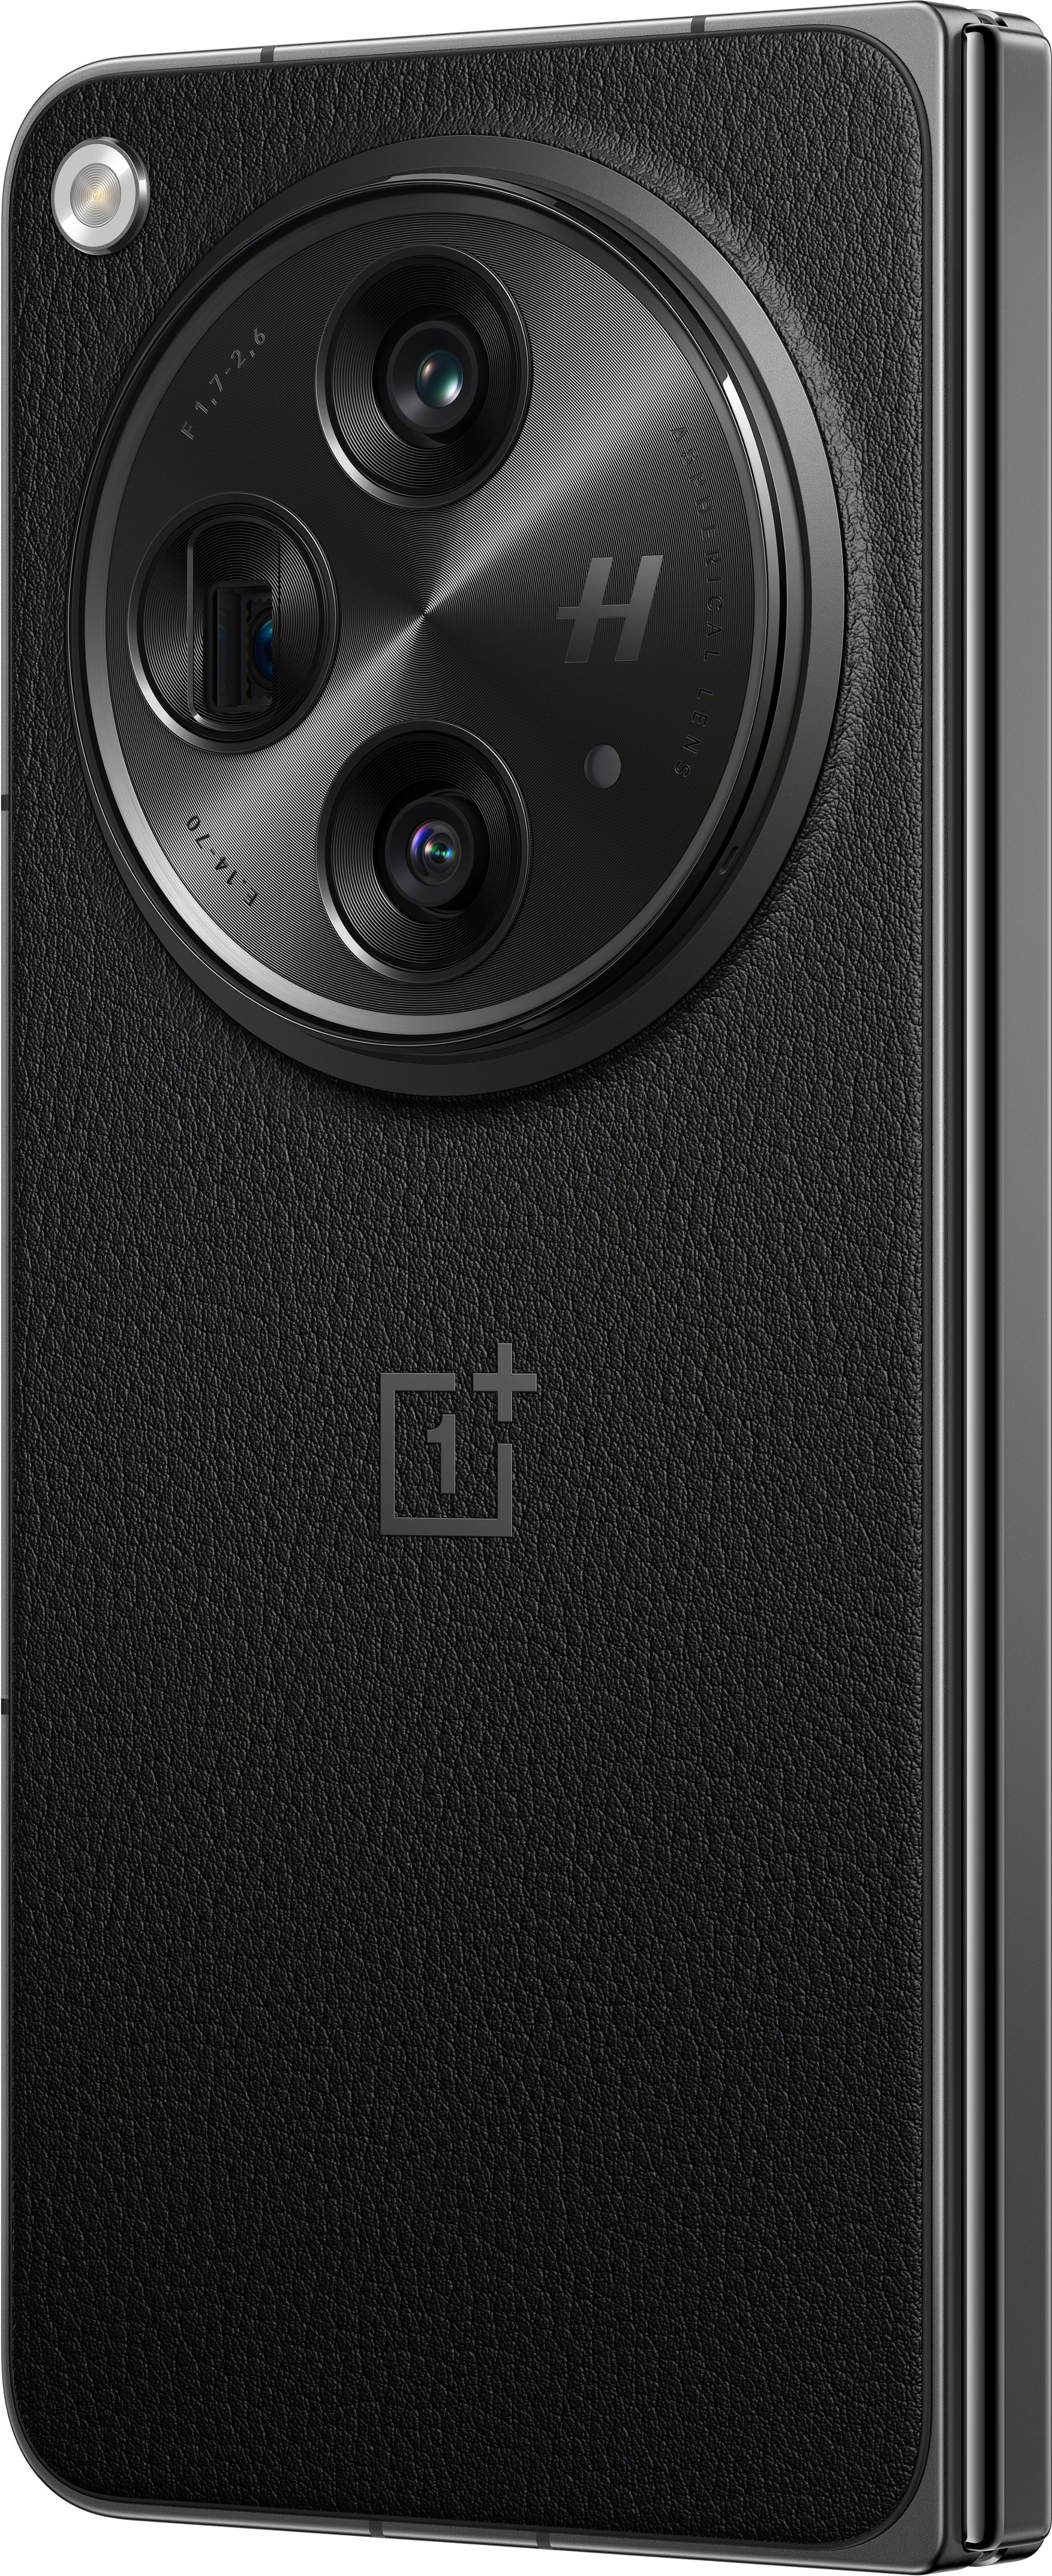  OnePlus Open, 16GB RAM+512GB, Dual-SIM, Voyager Black, US  Factory Unlocked Android Smartphone, 4805 mAh Battery, 67W Fast Charging,  Hasselblad Camera, 120Hz Fluid Display : Everything Else